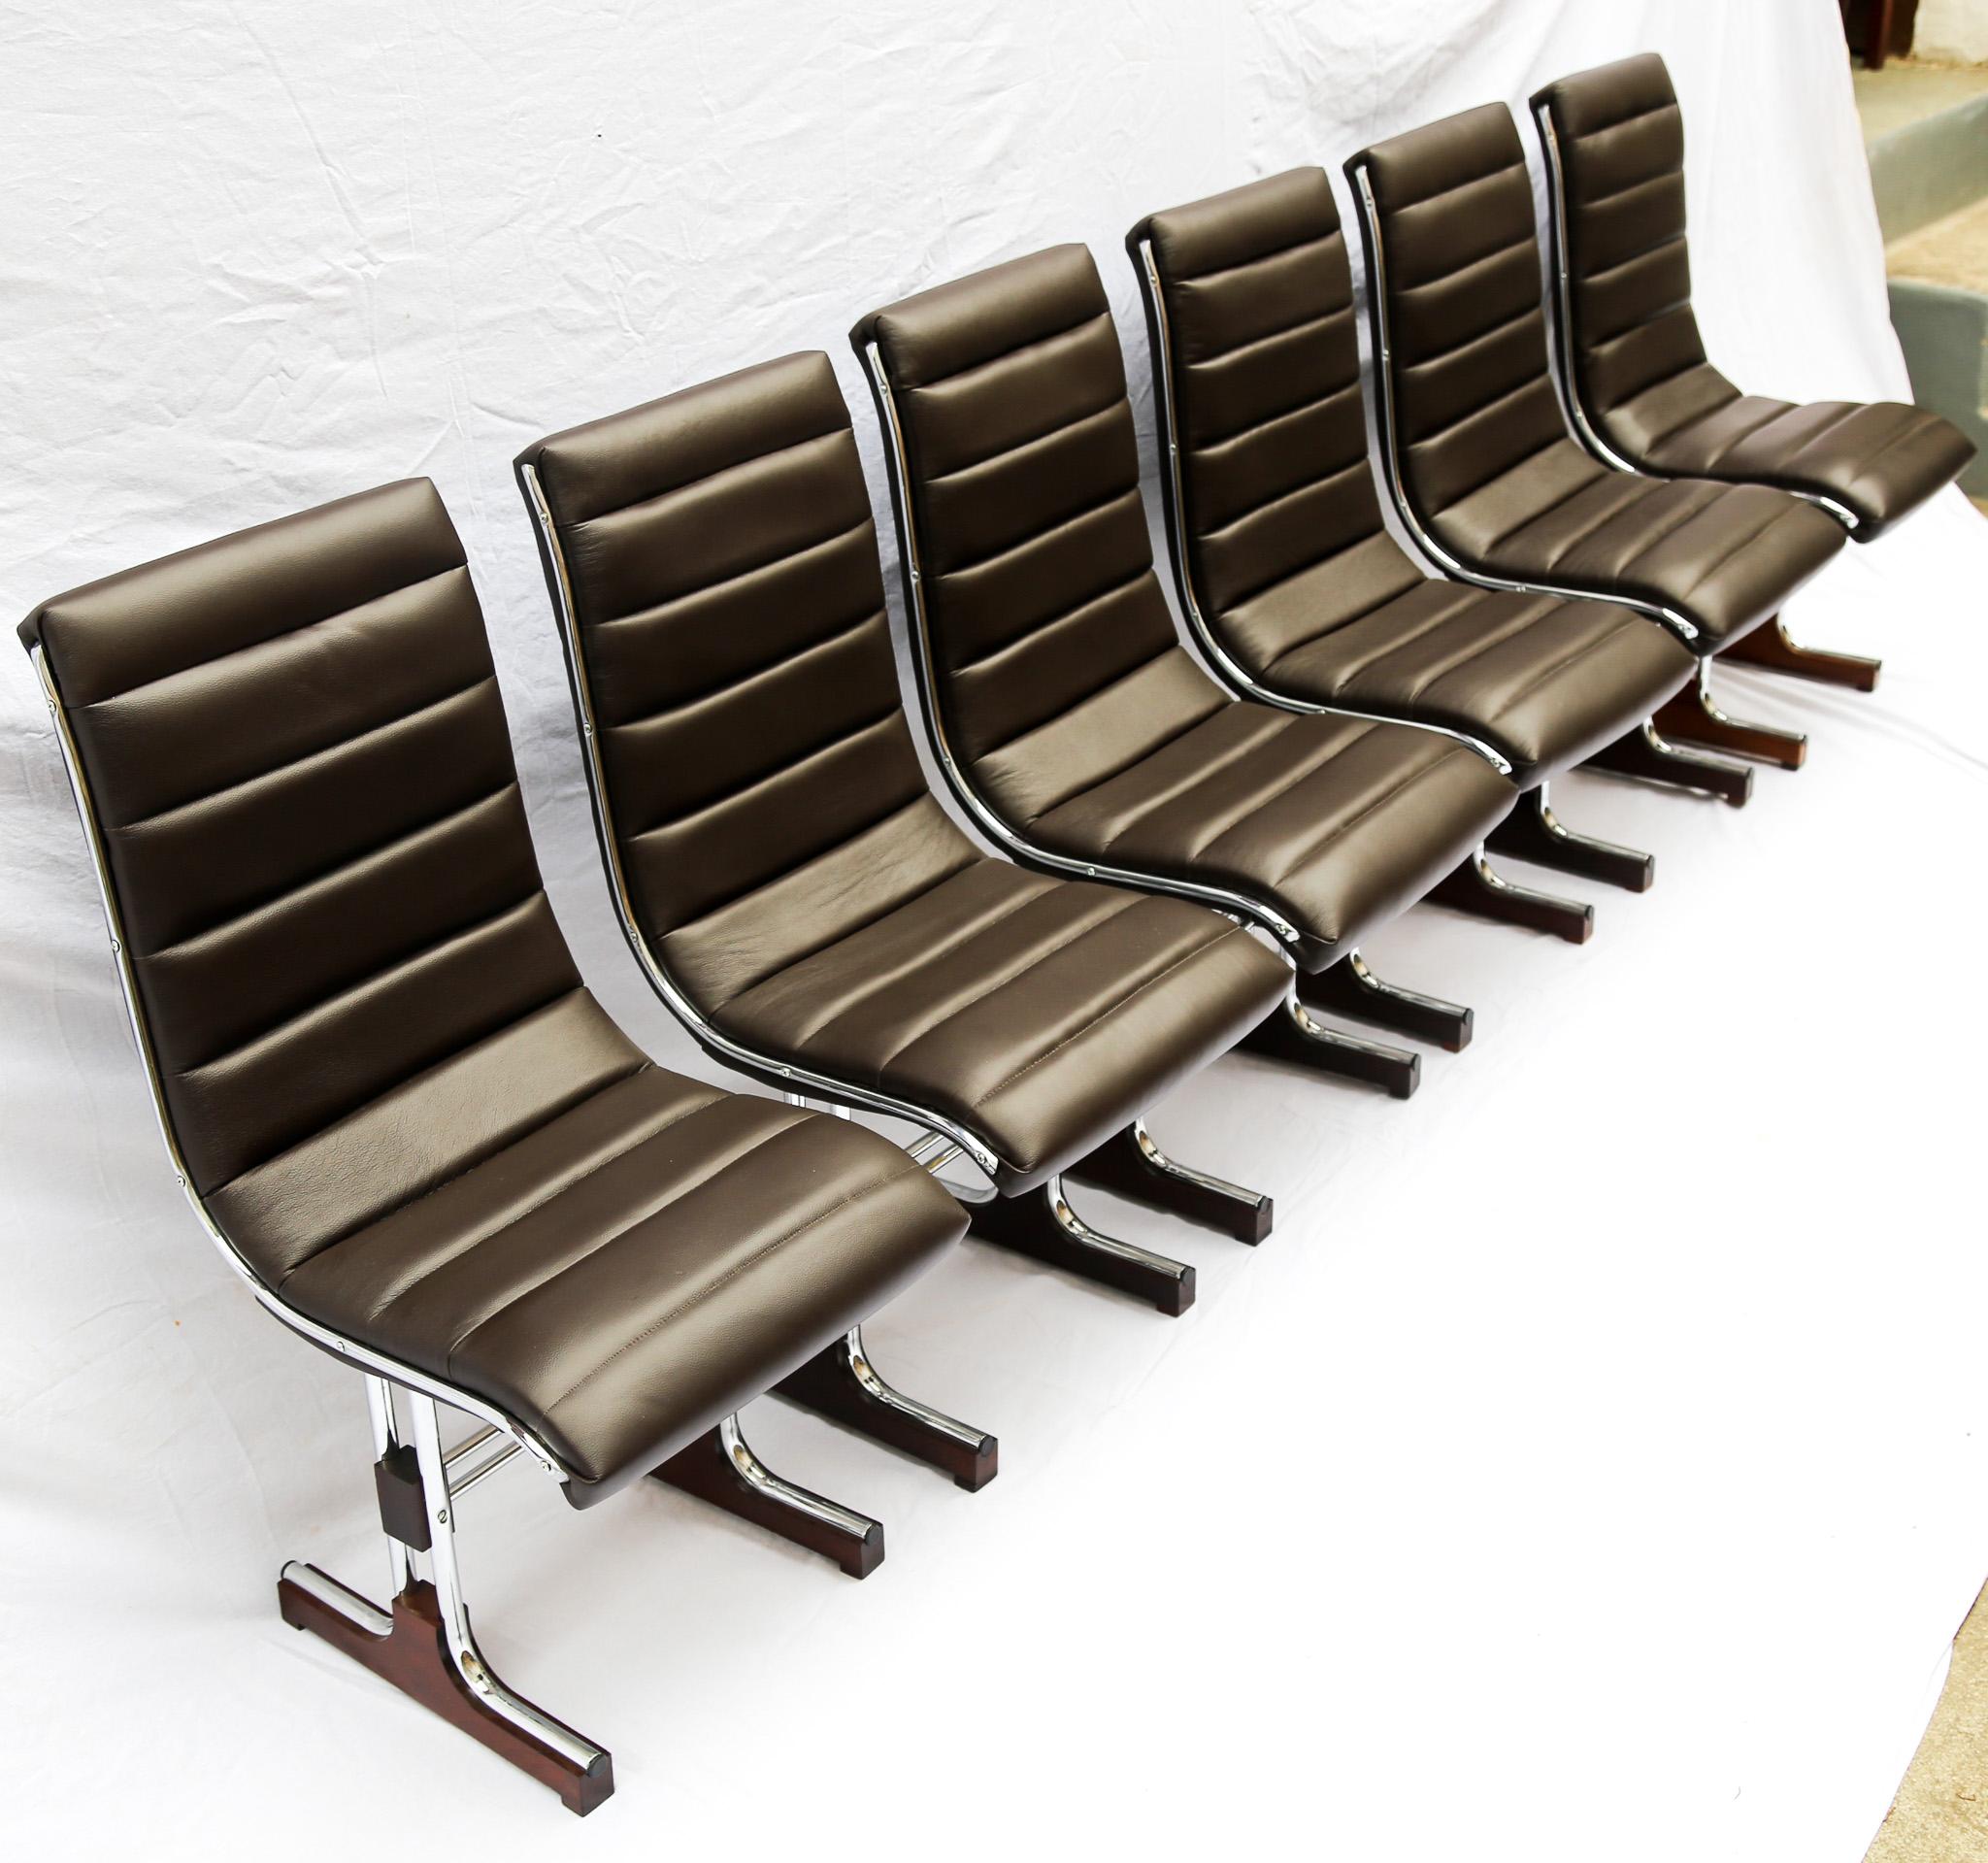 Late 20th Century Brazilian Modern Chair Set in Leather, Chrome and Hardwood, by Braszenski, 1970s For Sale